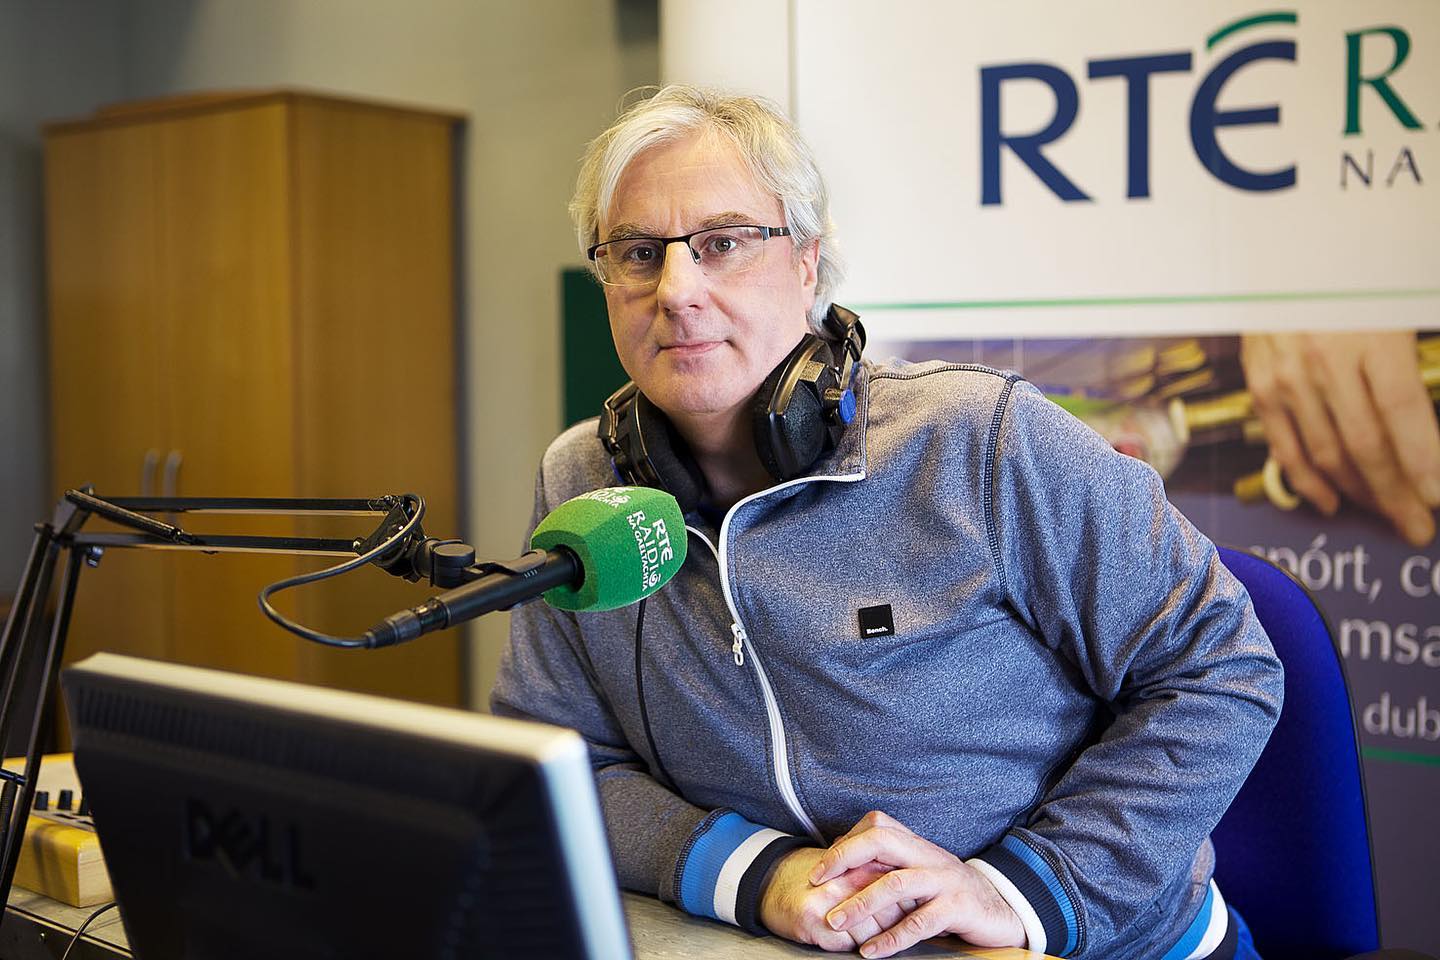 Fundraiser launched for renowned Irish language broadcaster and journalist